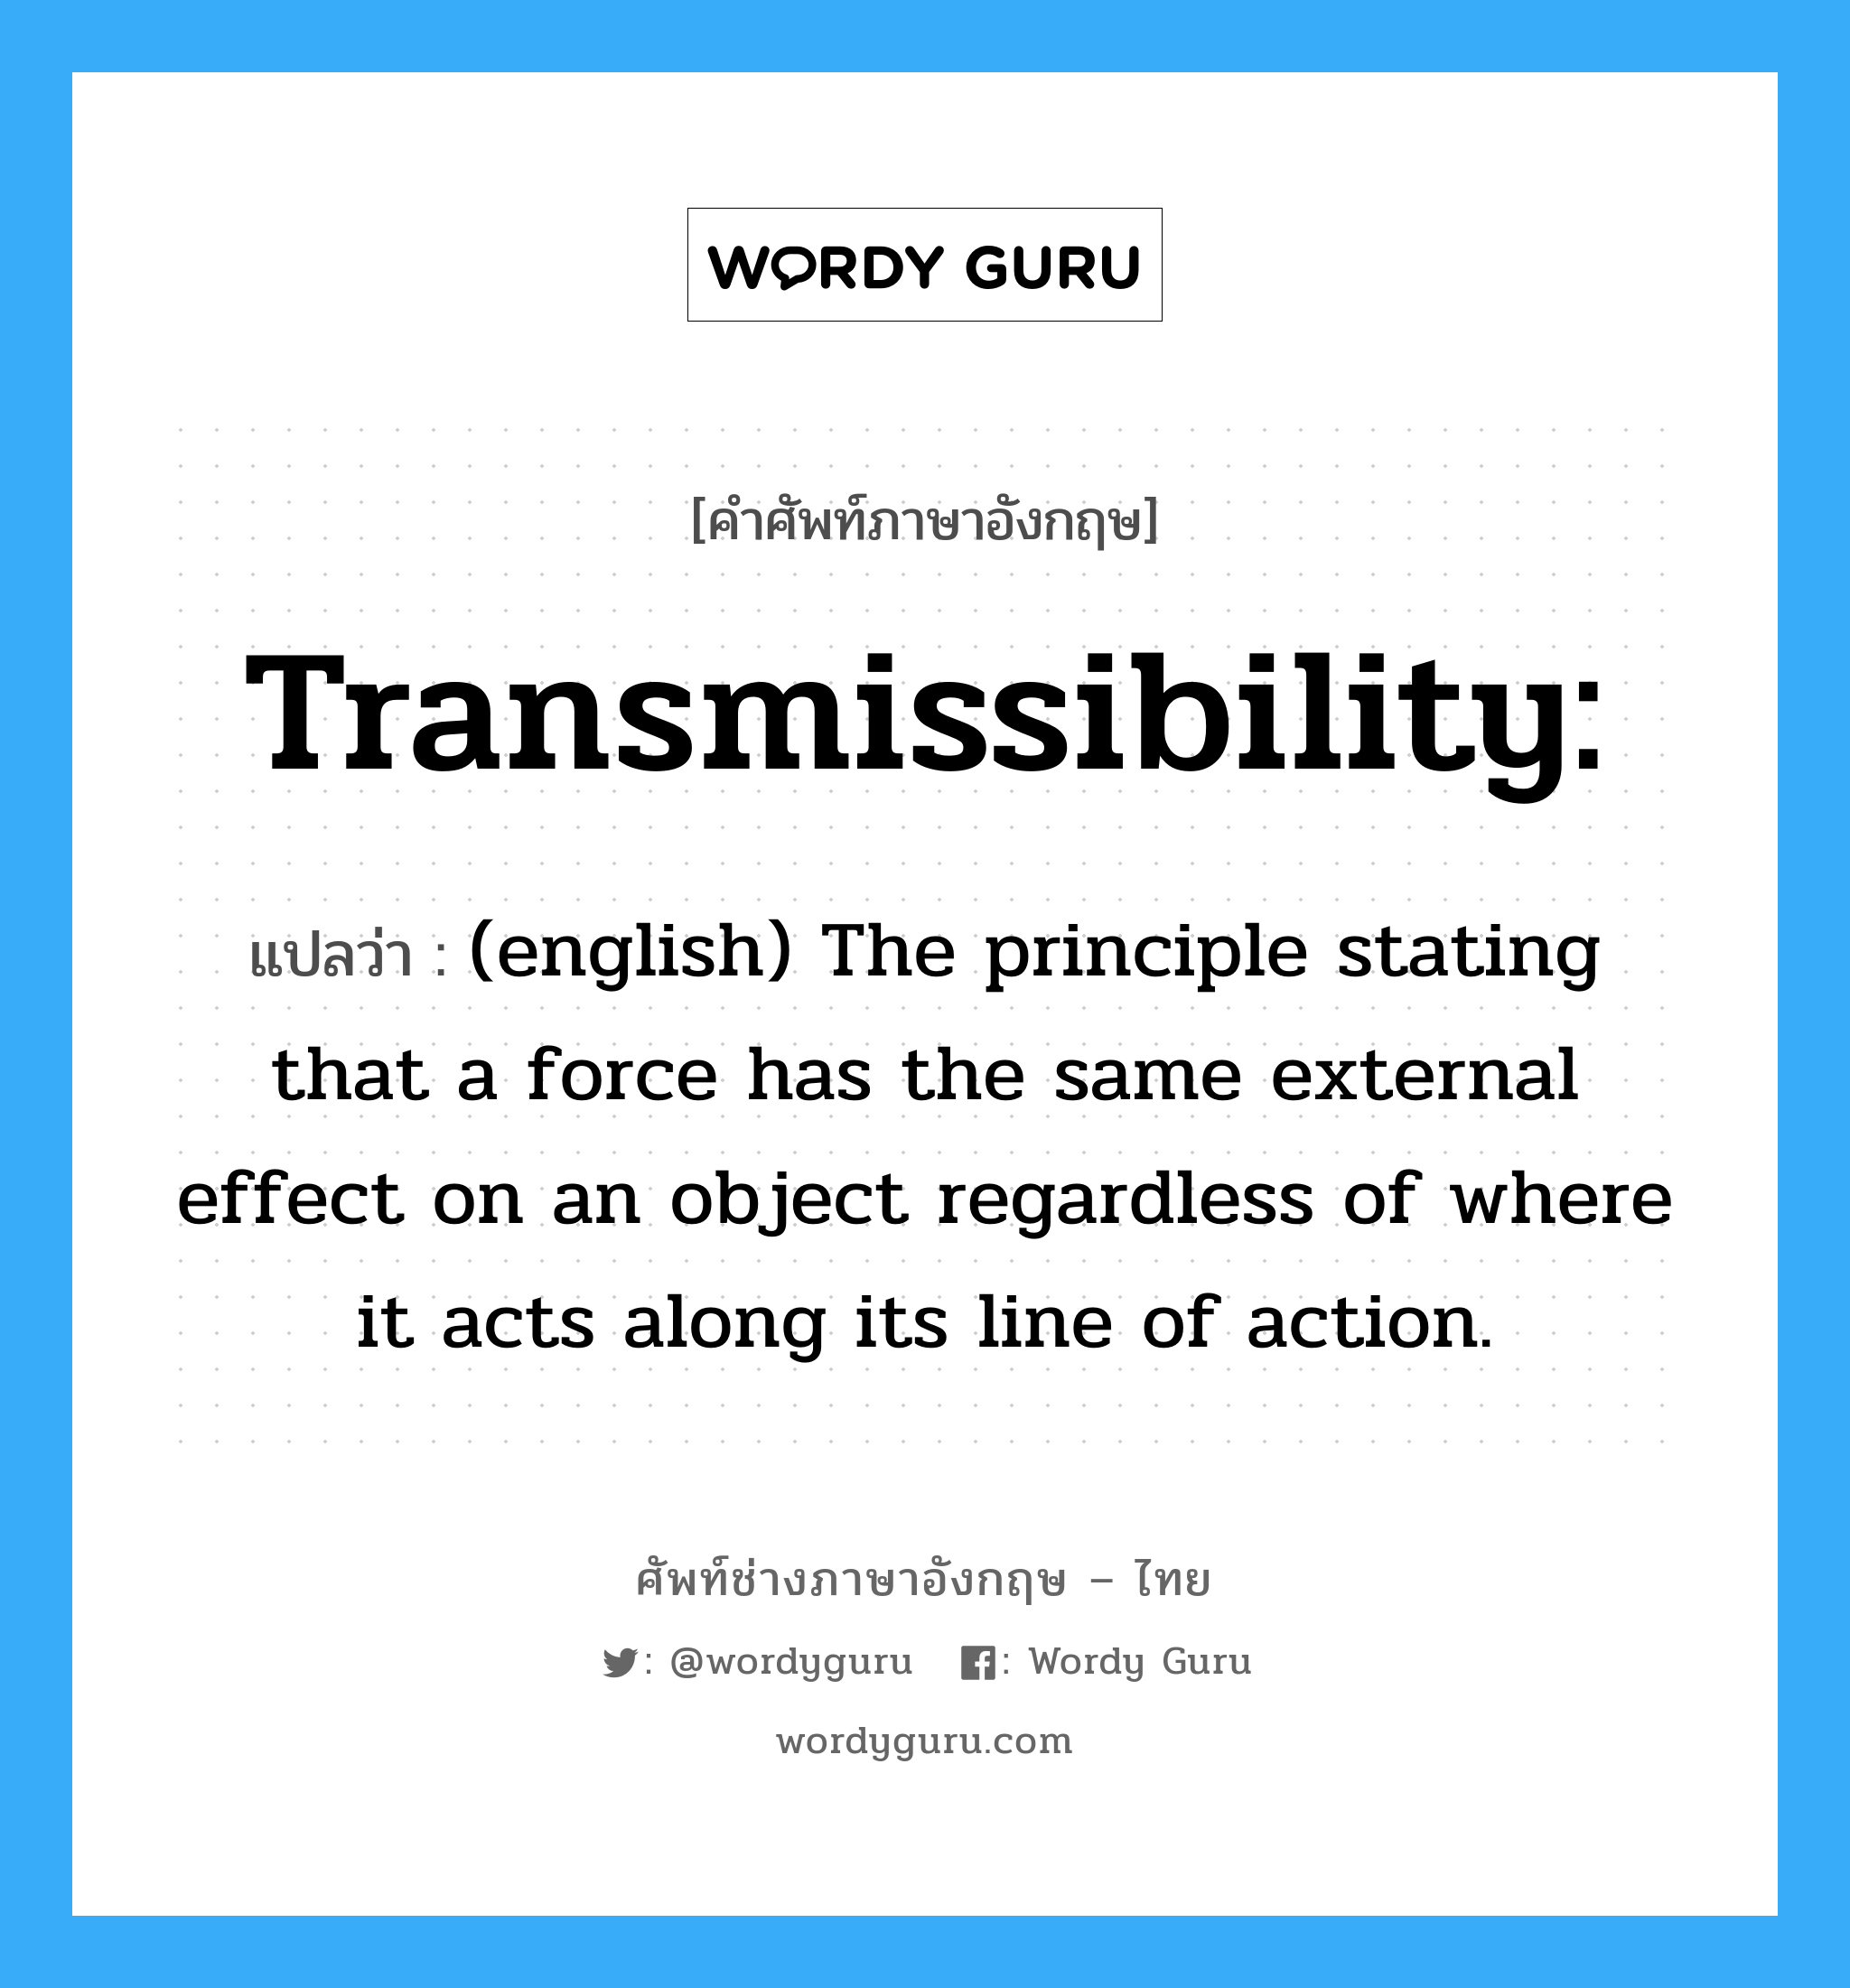 Transmissibility: แปลว่า?, คำศัพท์ช่างภาษาอังกฤษ - ไทย Transmissibility: คำศัพท์ภาษาอังกฤษ Transmissibility: แปลว่า (english) The principle stating that a force has the same external effect on an object regardless of where it acts along its line of action.